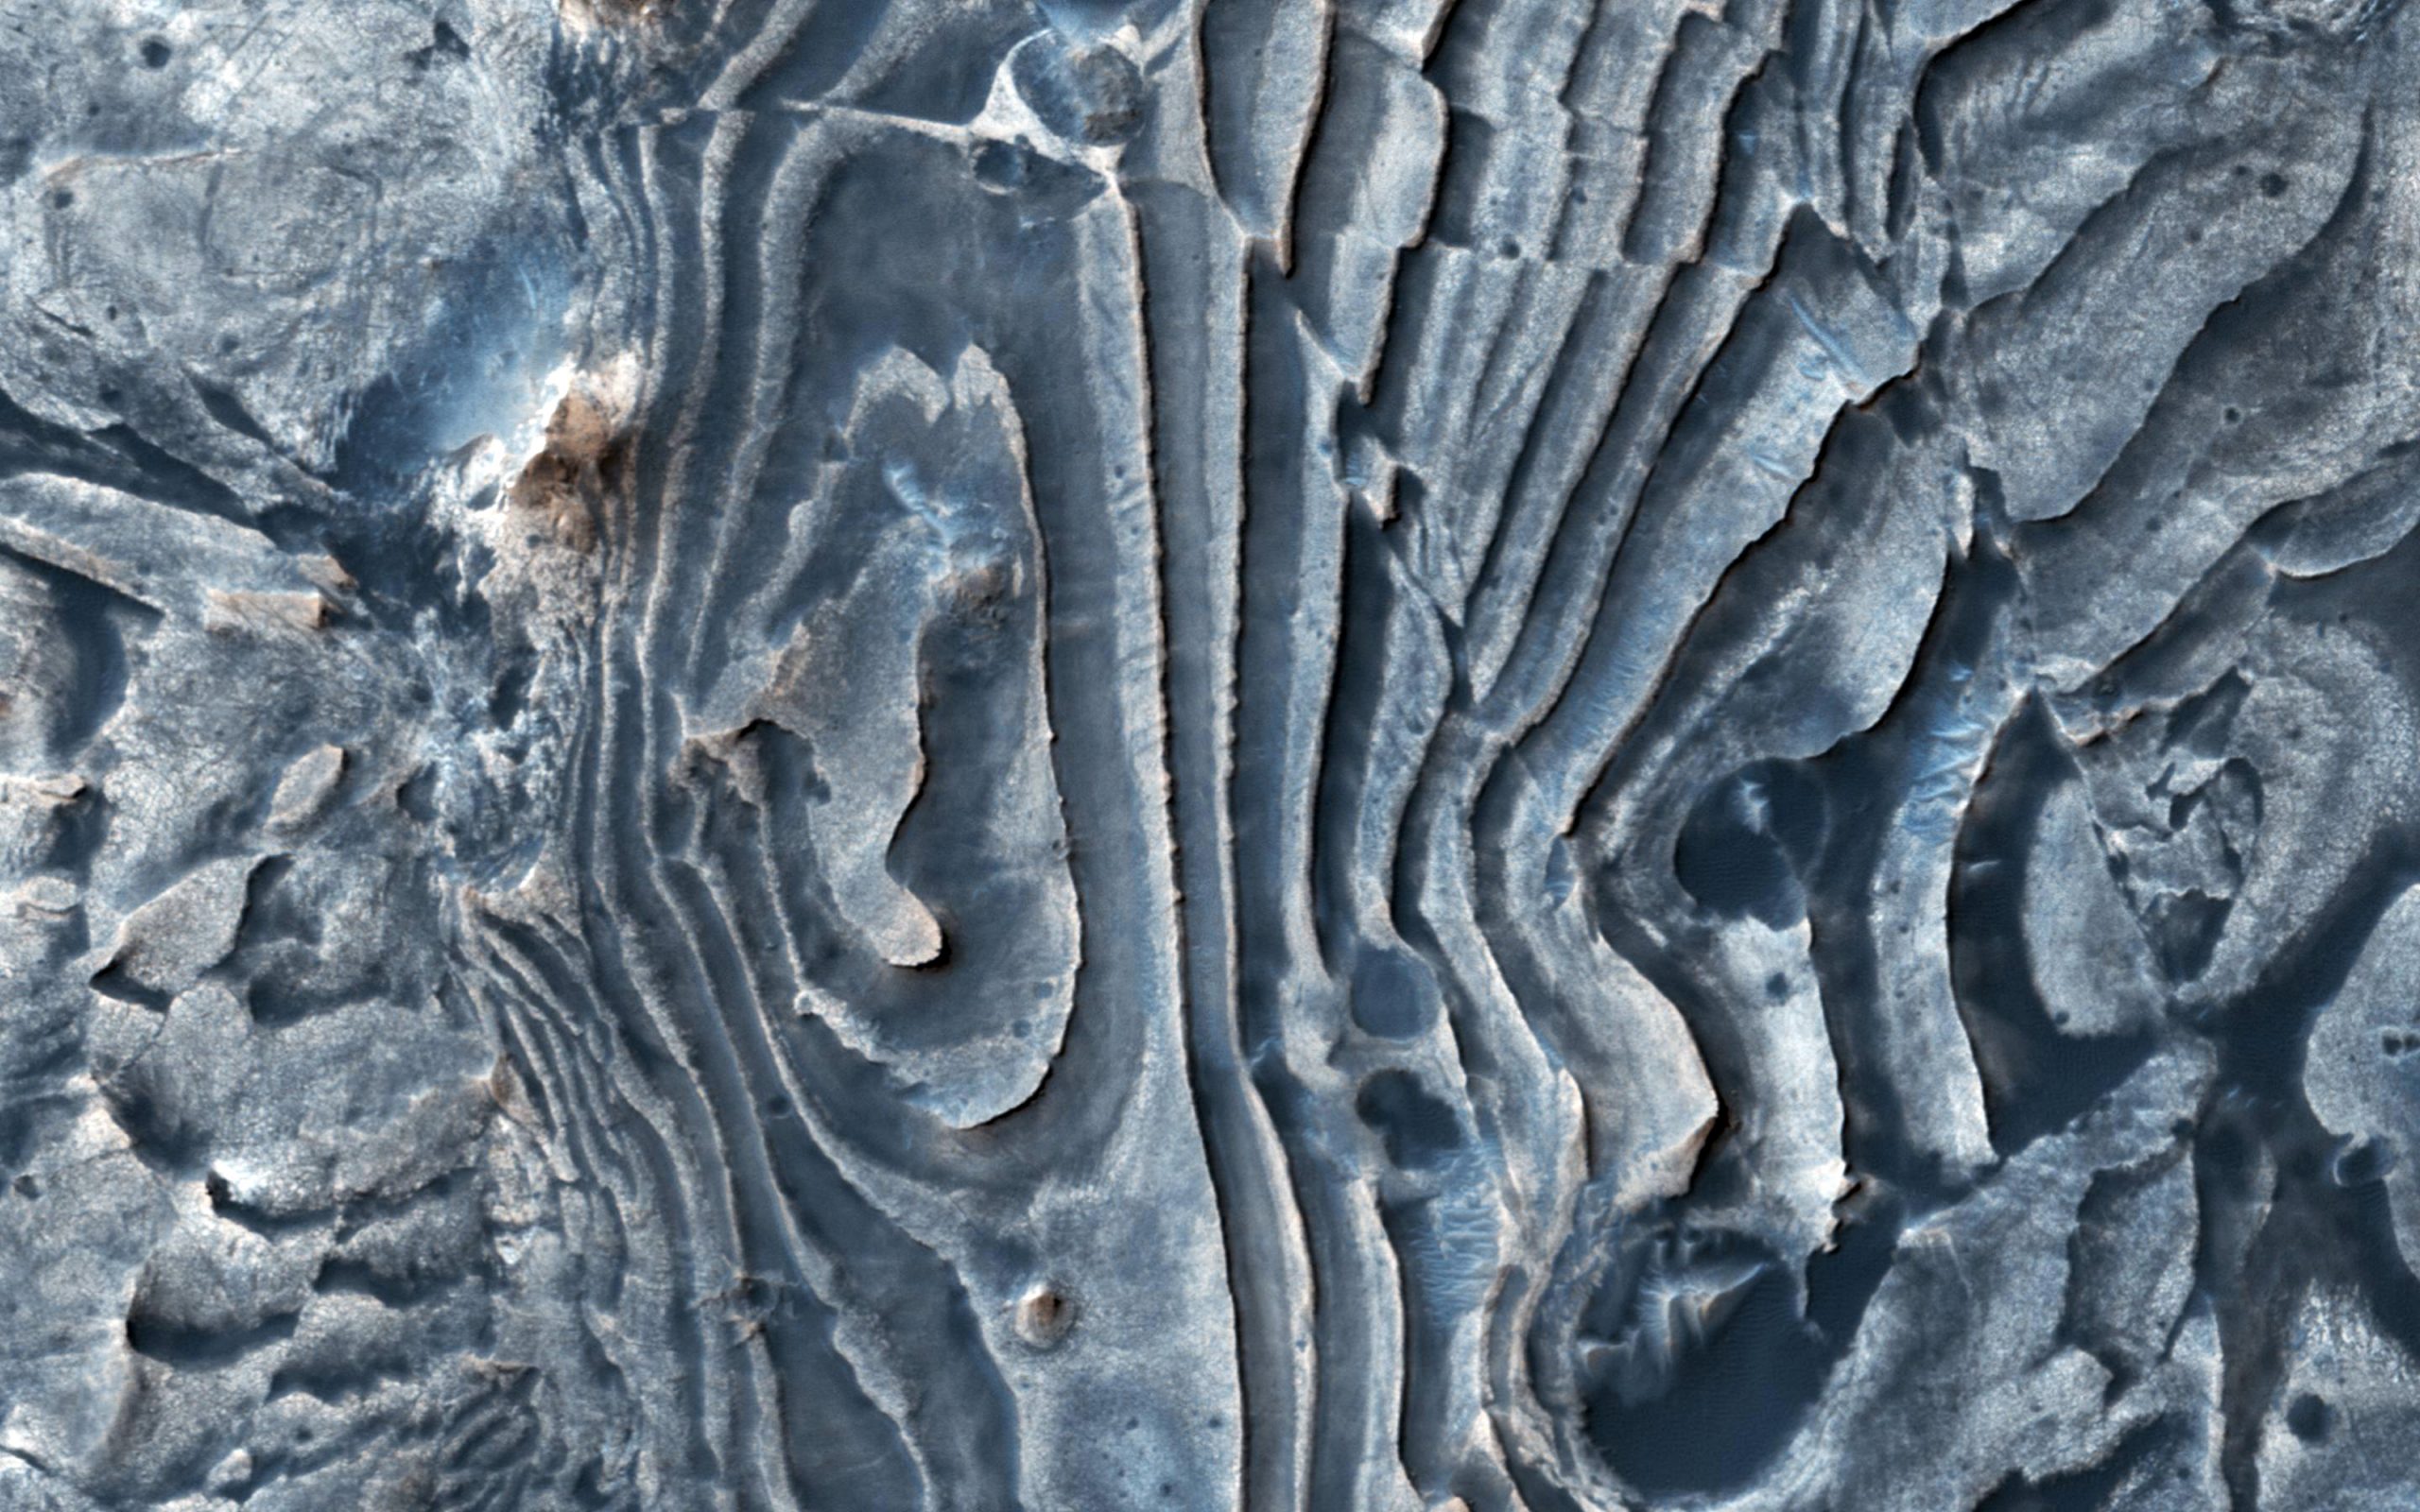 Faulted layers in the martian ground.